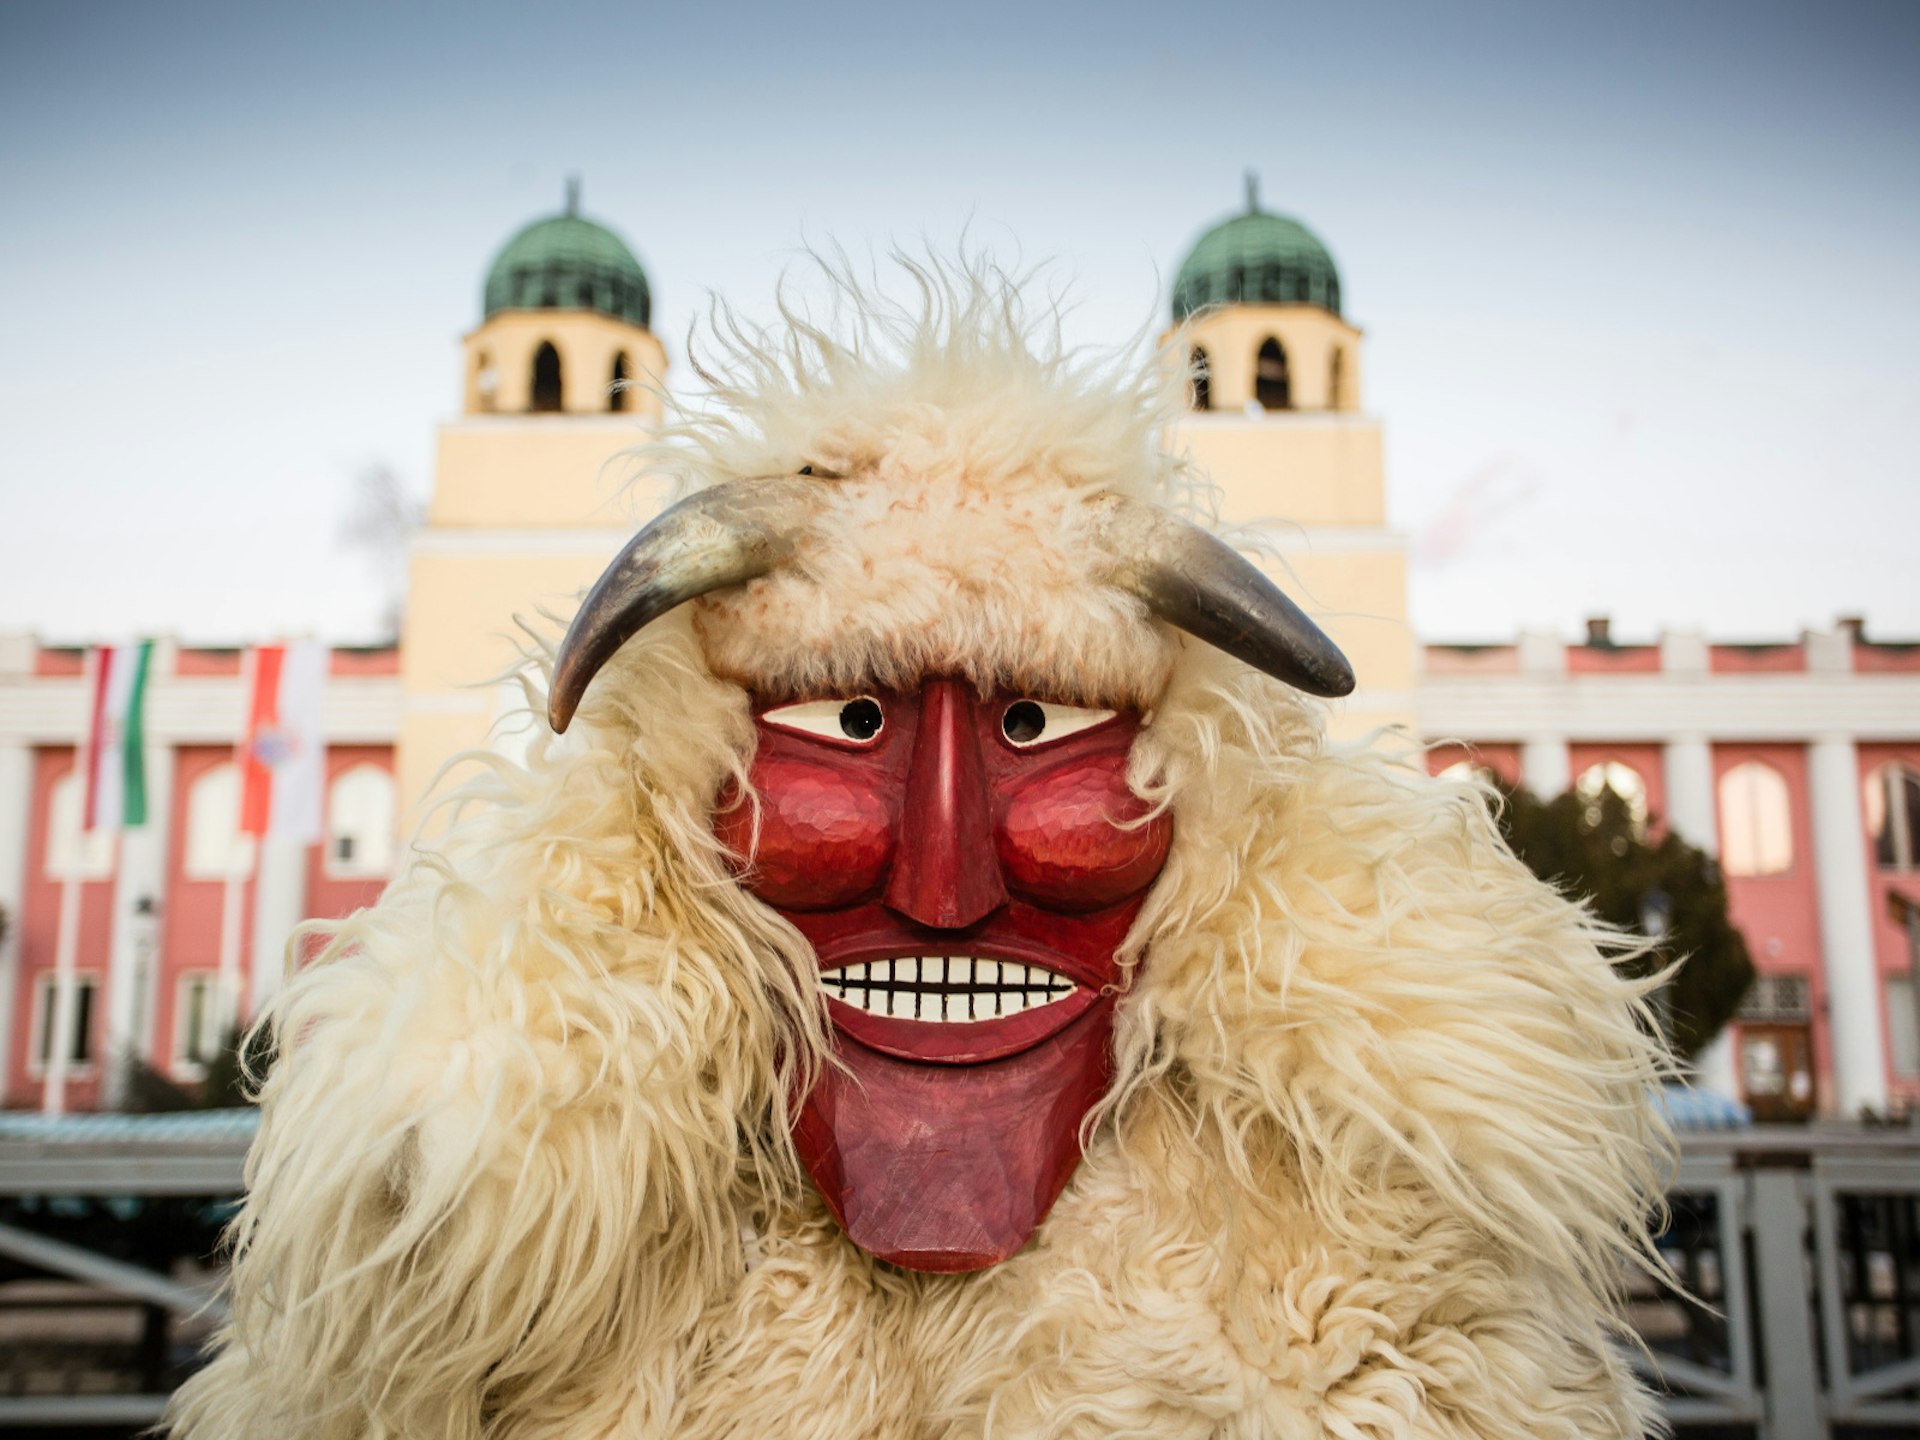 Demonic-looking masks are a traditional feature of the annual Busójárás carnival in Mohács